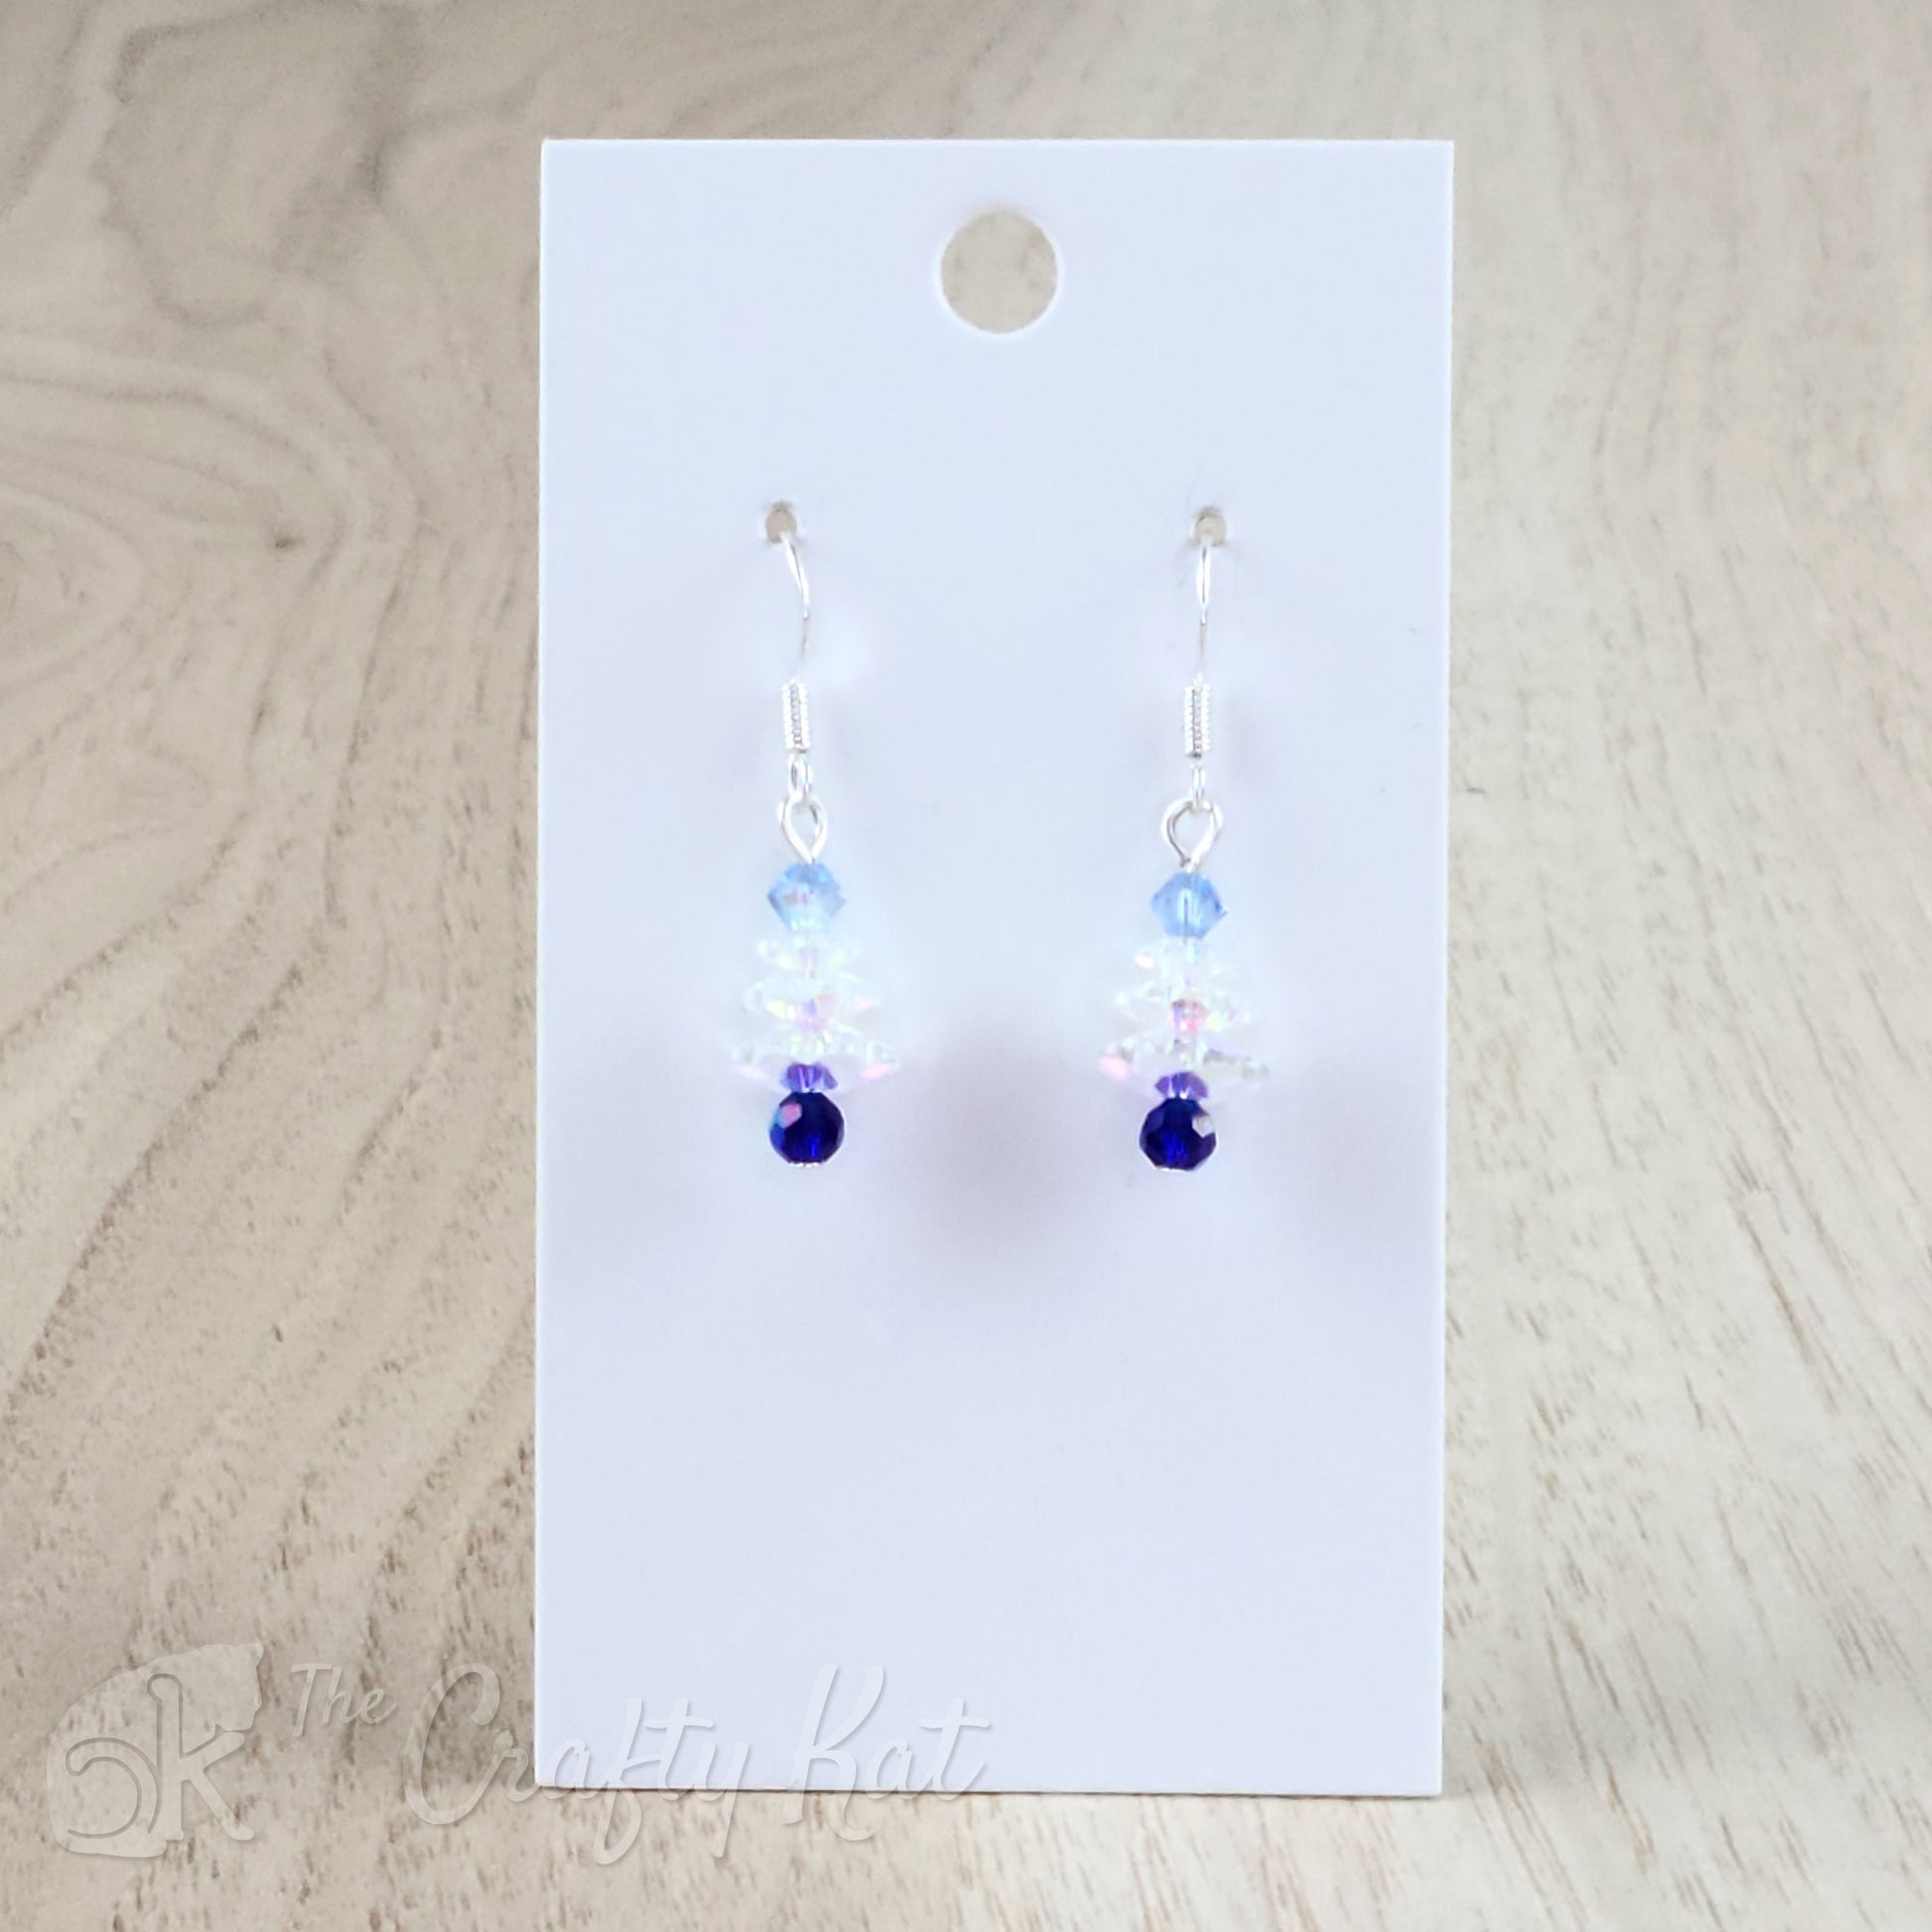 A pair of earring drops made of faceted crystal beads, each drop forming the shape of a holiday tree. This variation features an iridescent dark blue base, iridescent white branches, and a pale blue topper on silver-plated base metal.